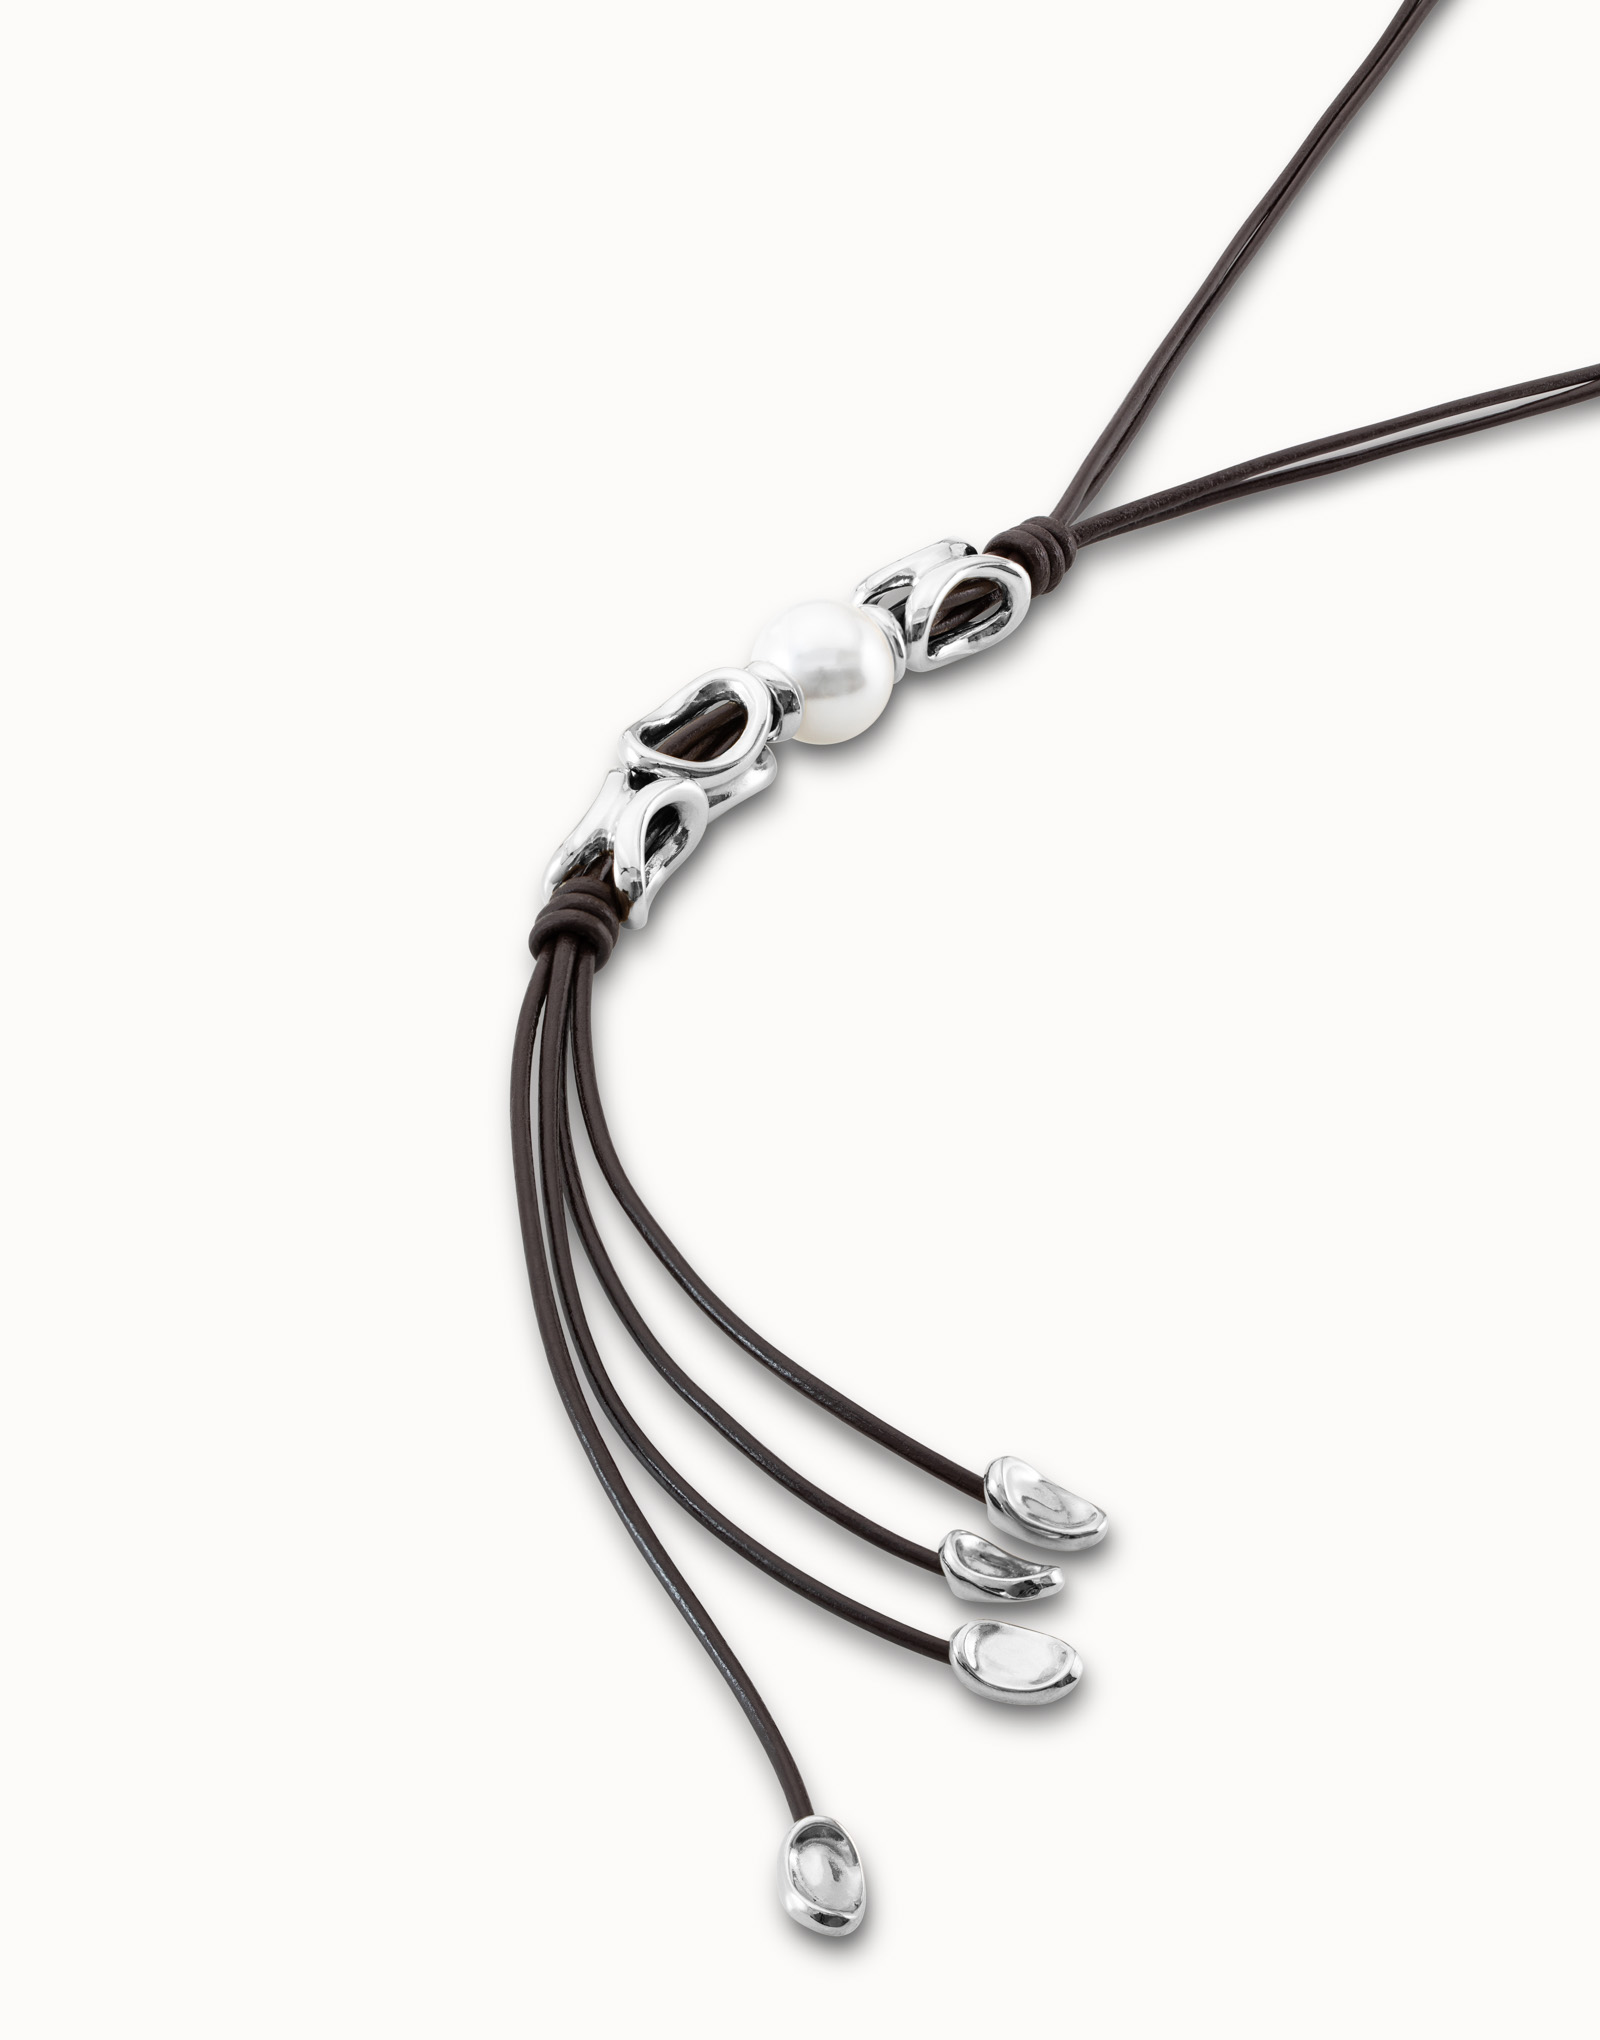 Necklace with 4 long leather whip strips, central pearl and silver oval links, Silver, large image number null